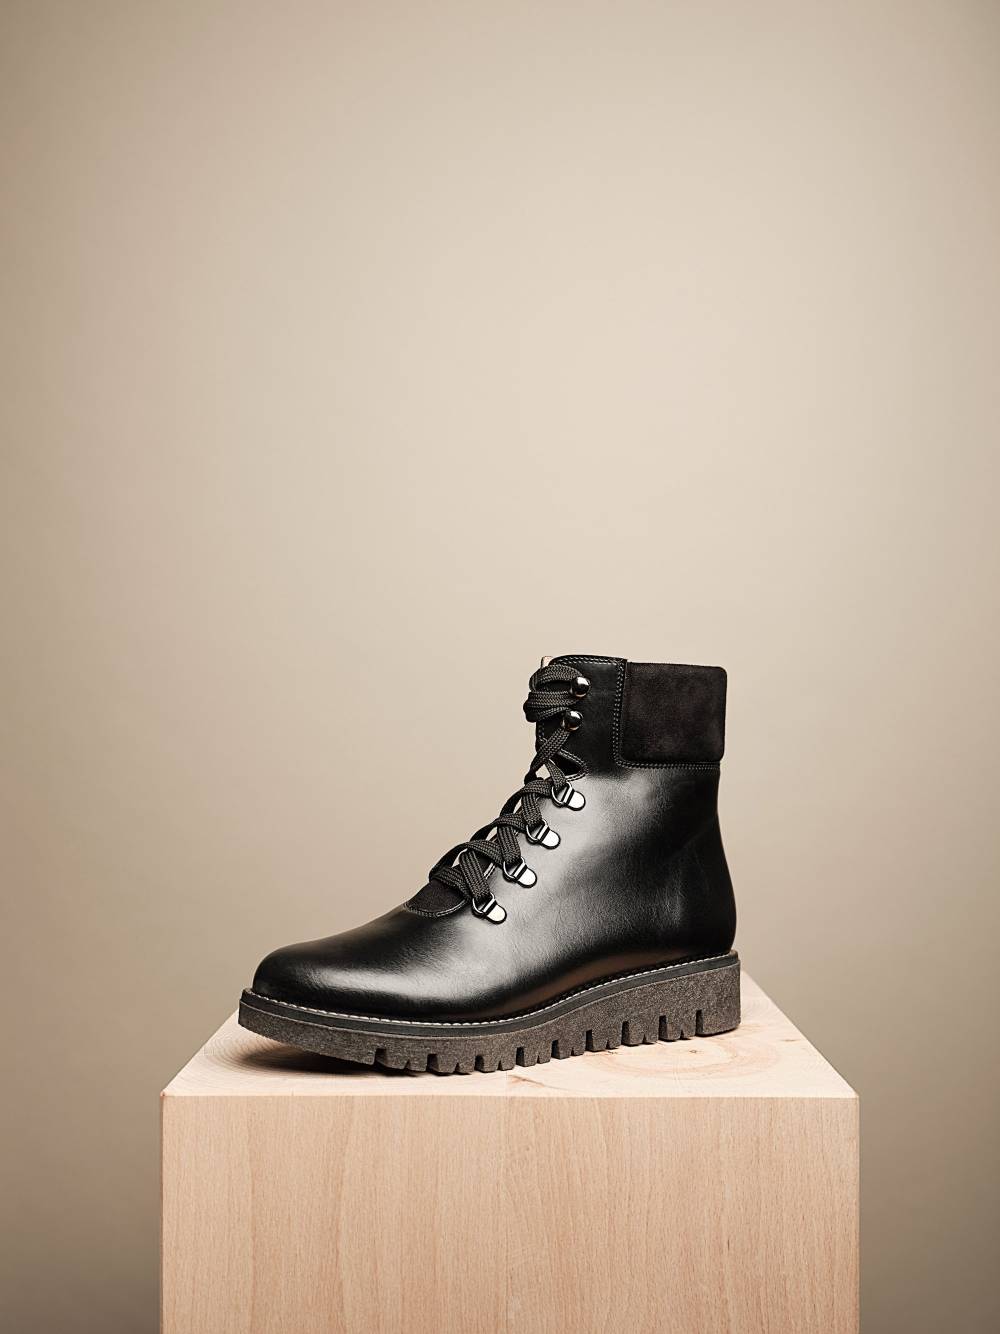 bhava studio sustainable affordable boots